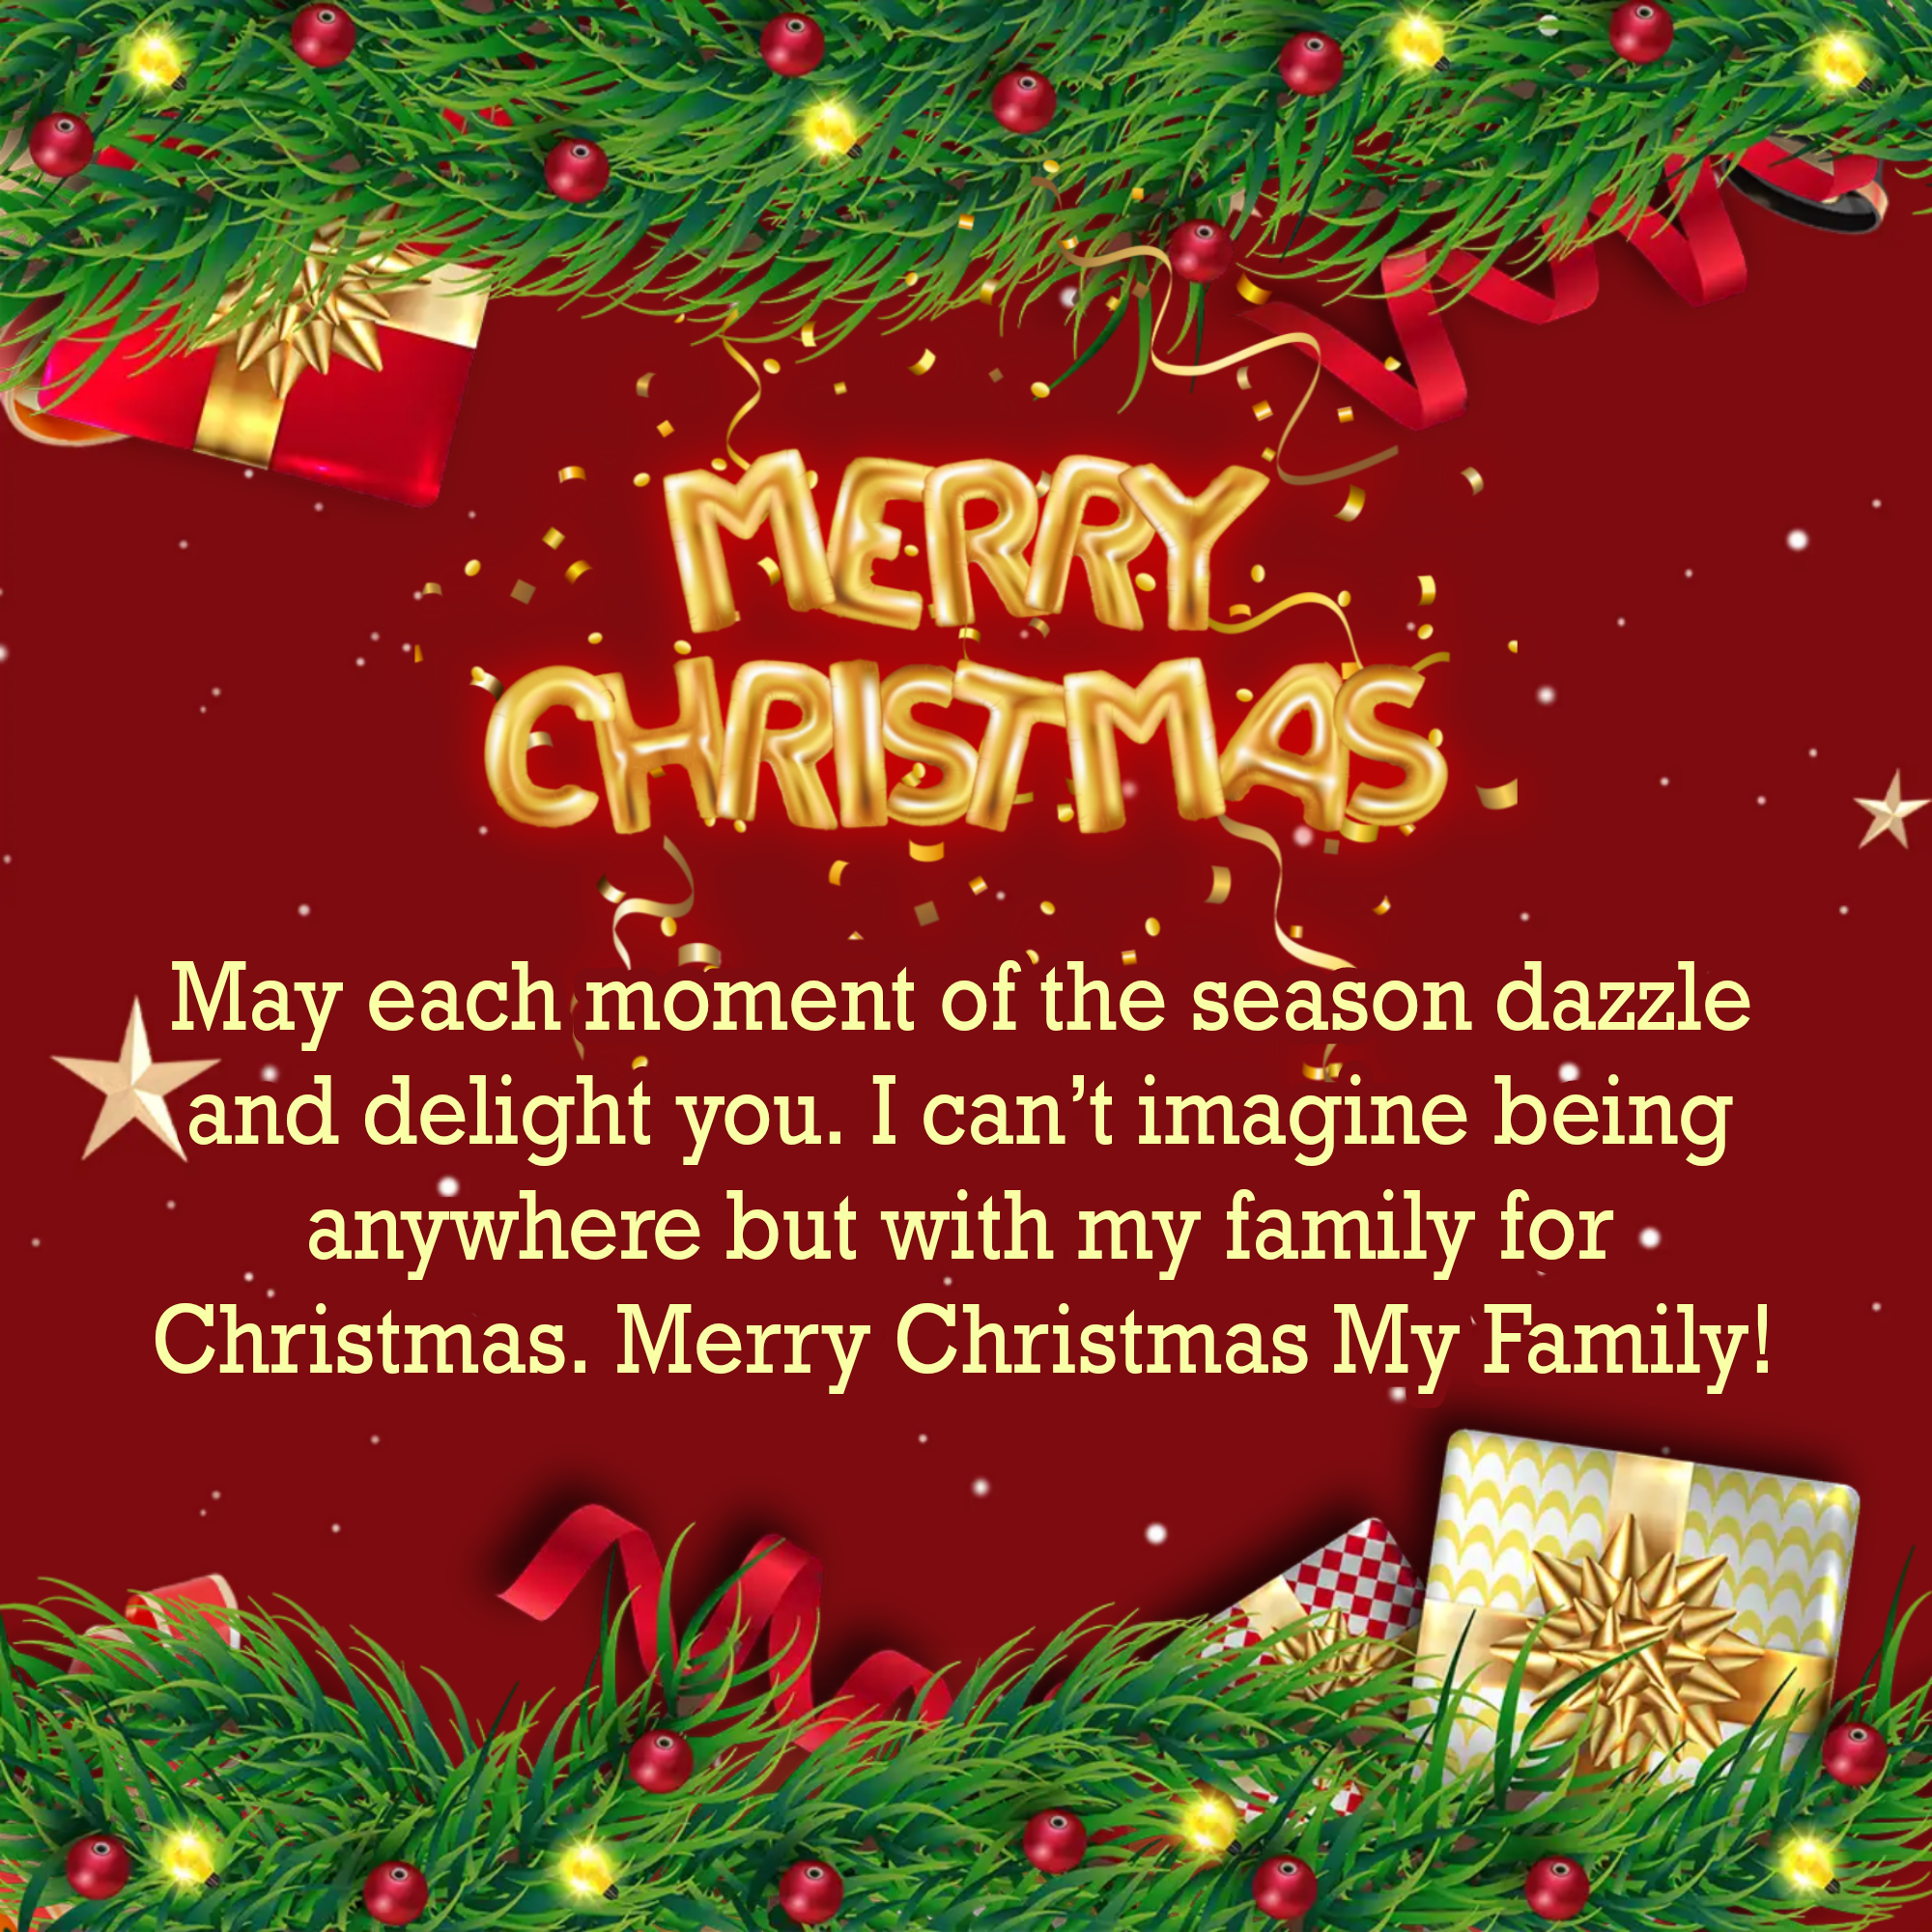 May each moment of the season dazzle and delight you